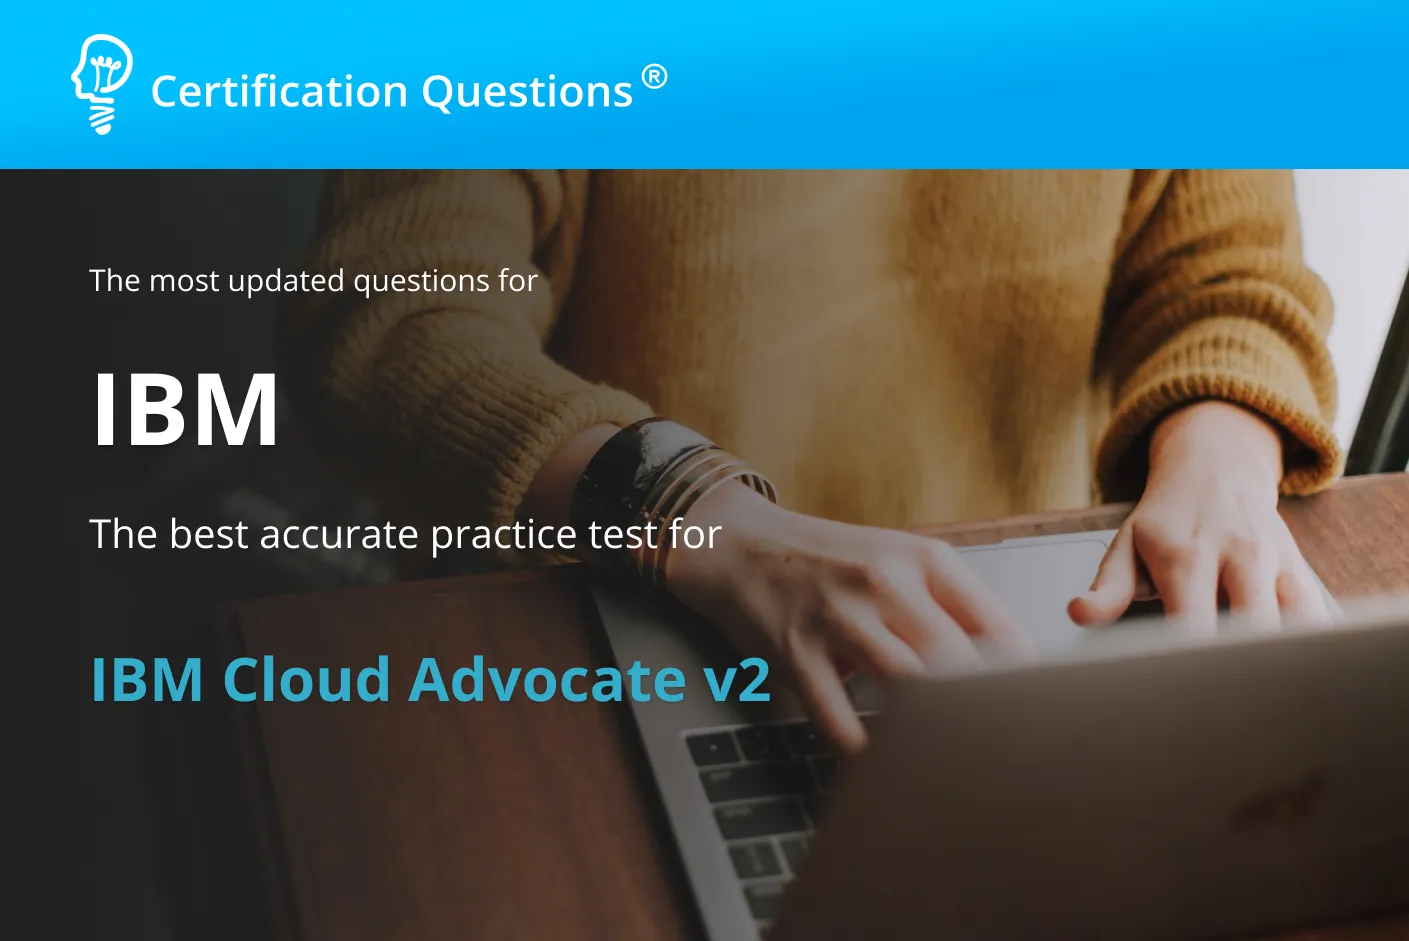 This image represents the IBM Cloud Advocate V2 Exam in the USA